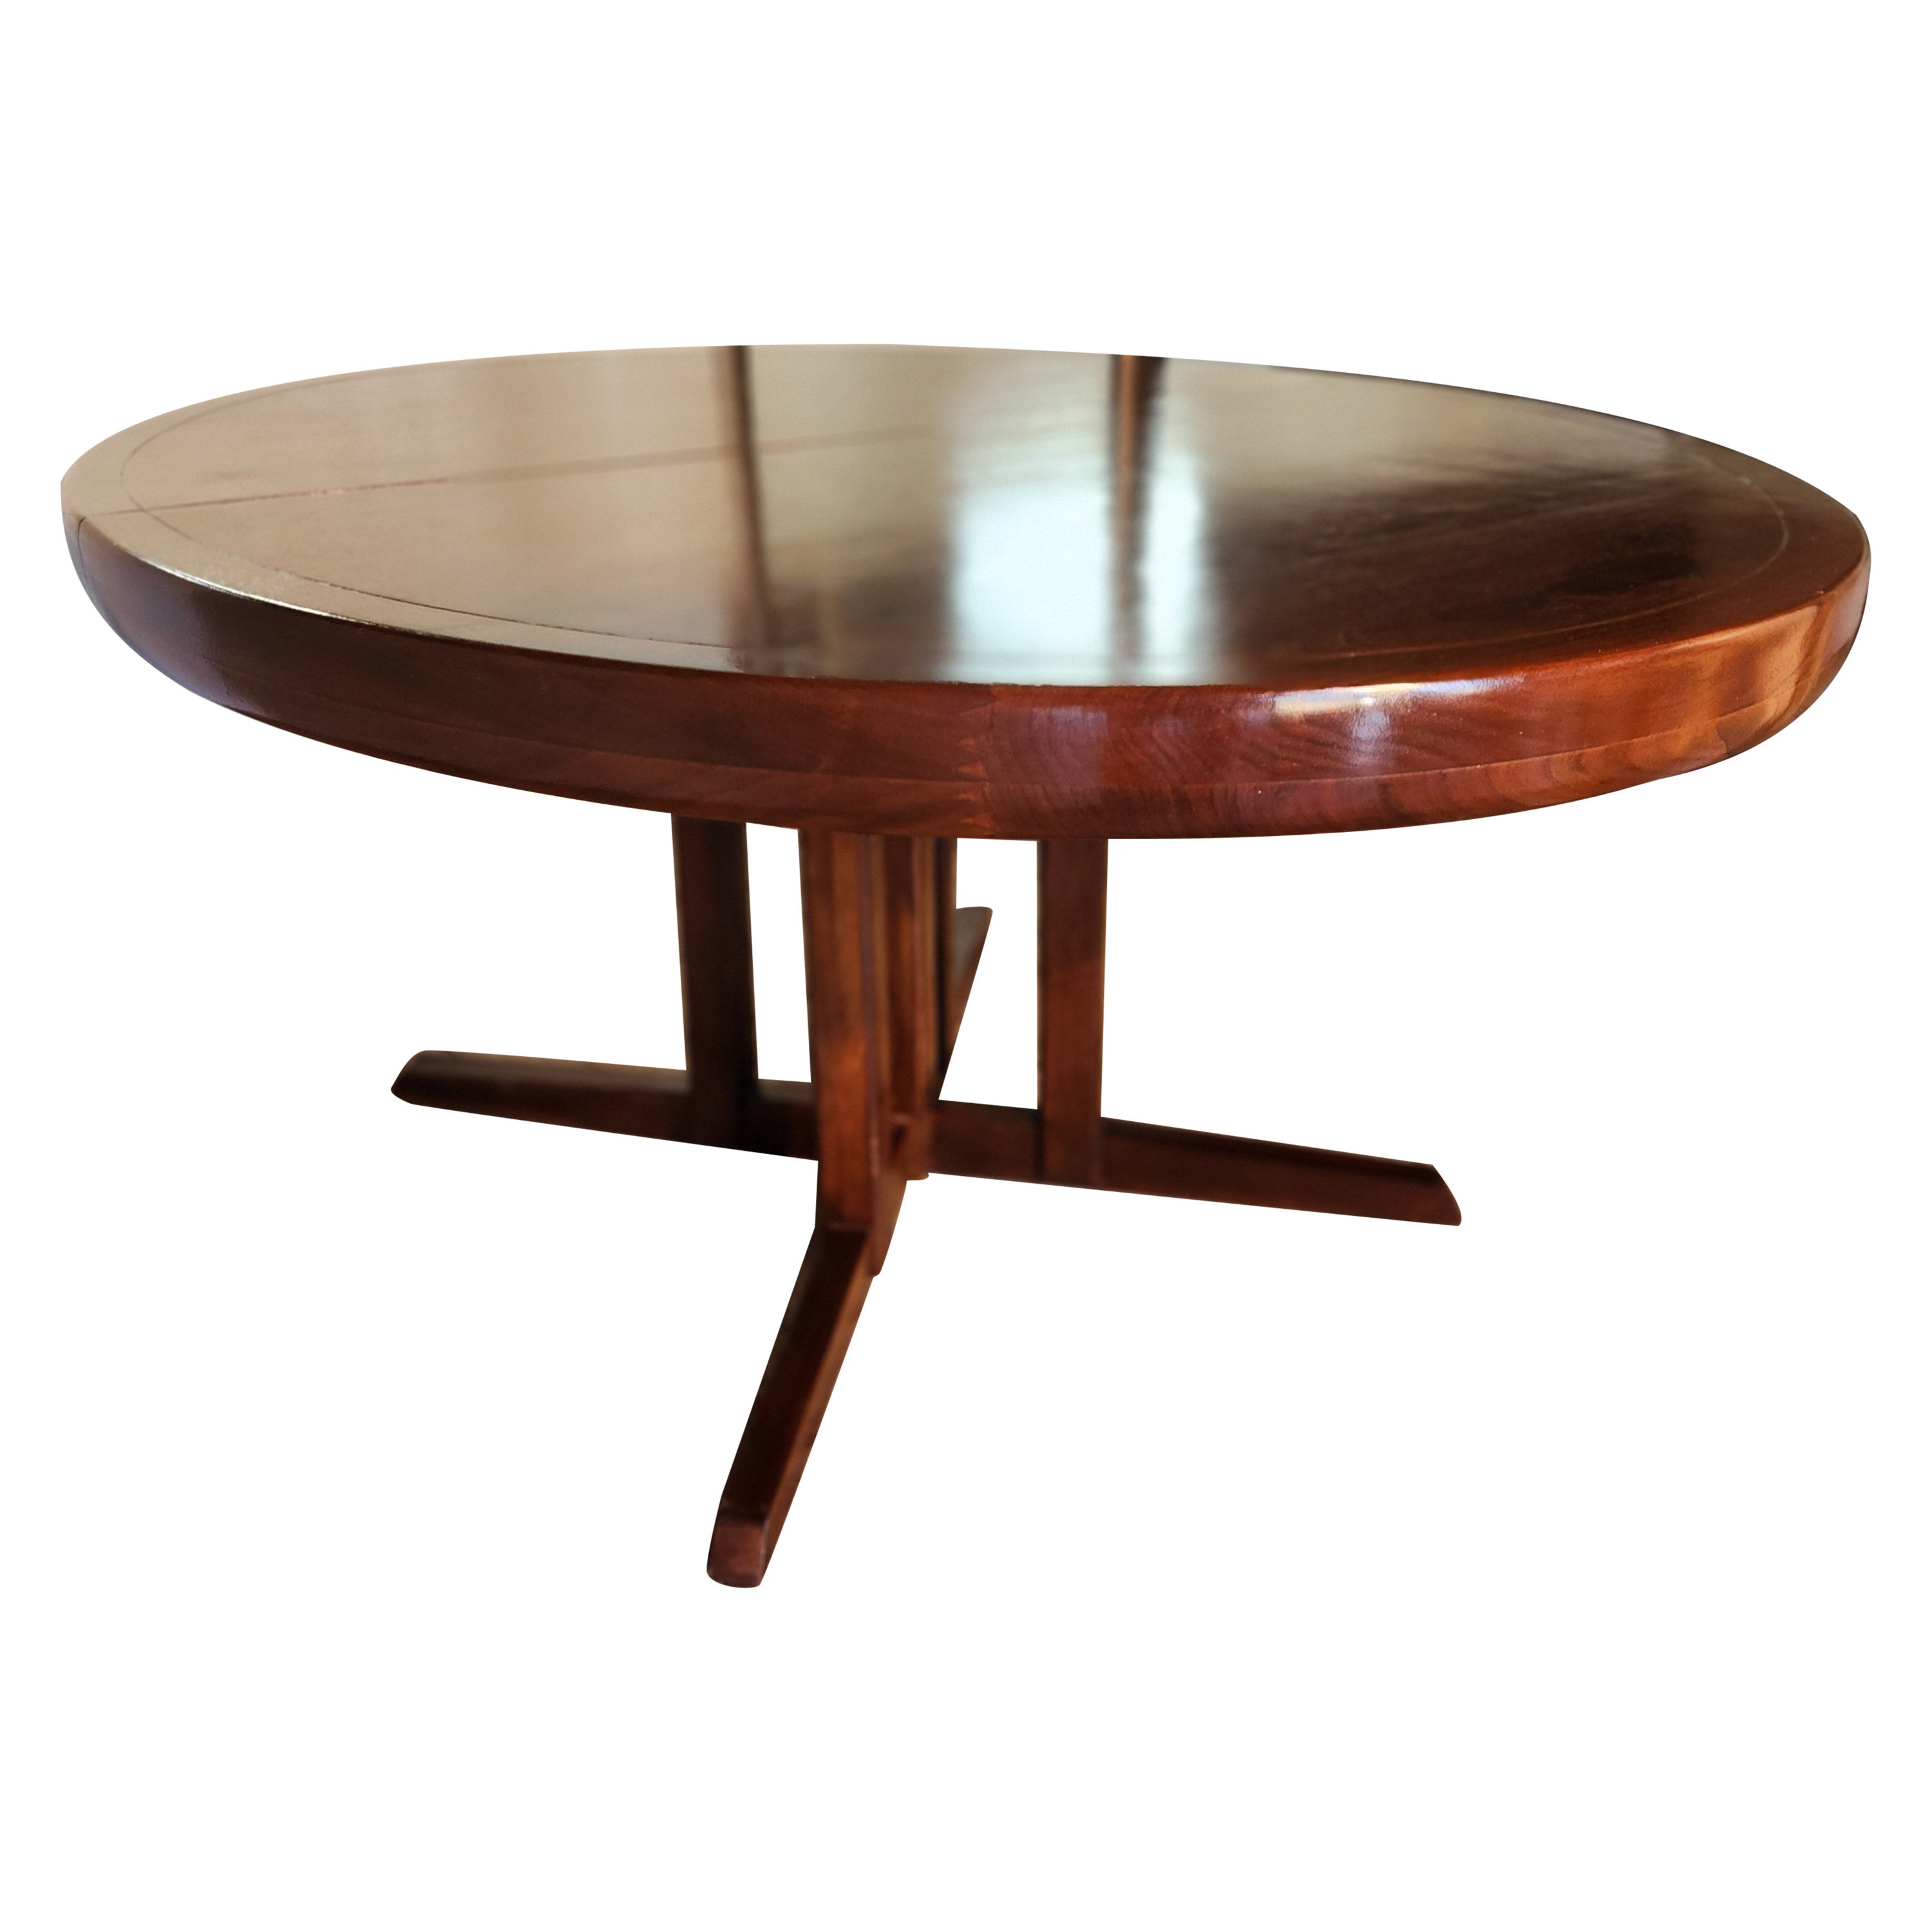 George Nakashima Extendable Walnut Dining Table Model 277 for Widdicomb, 1959 For Sale